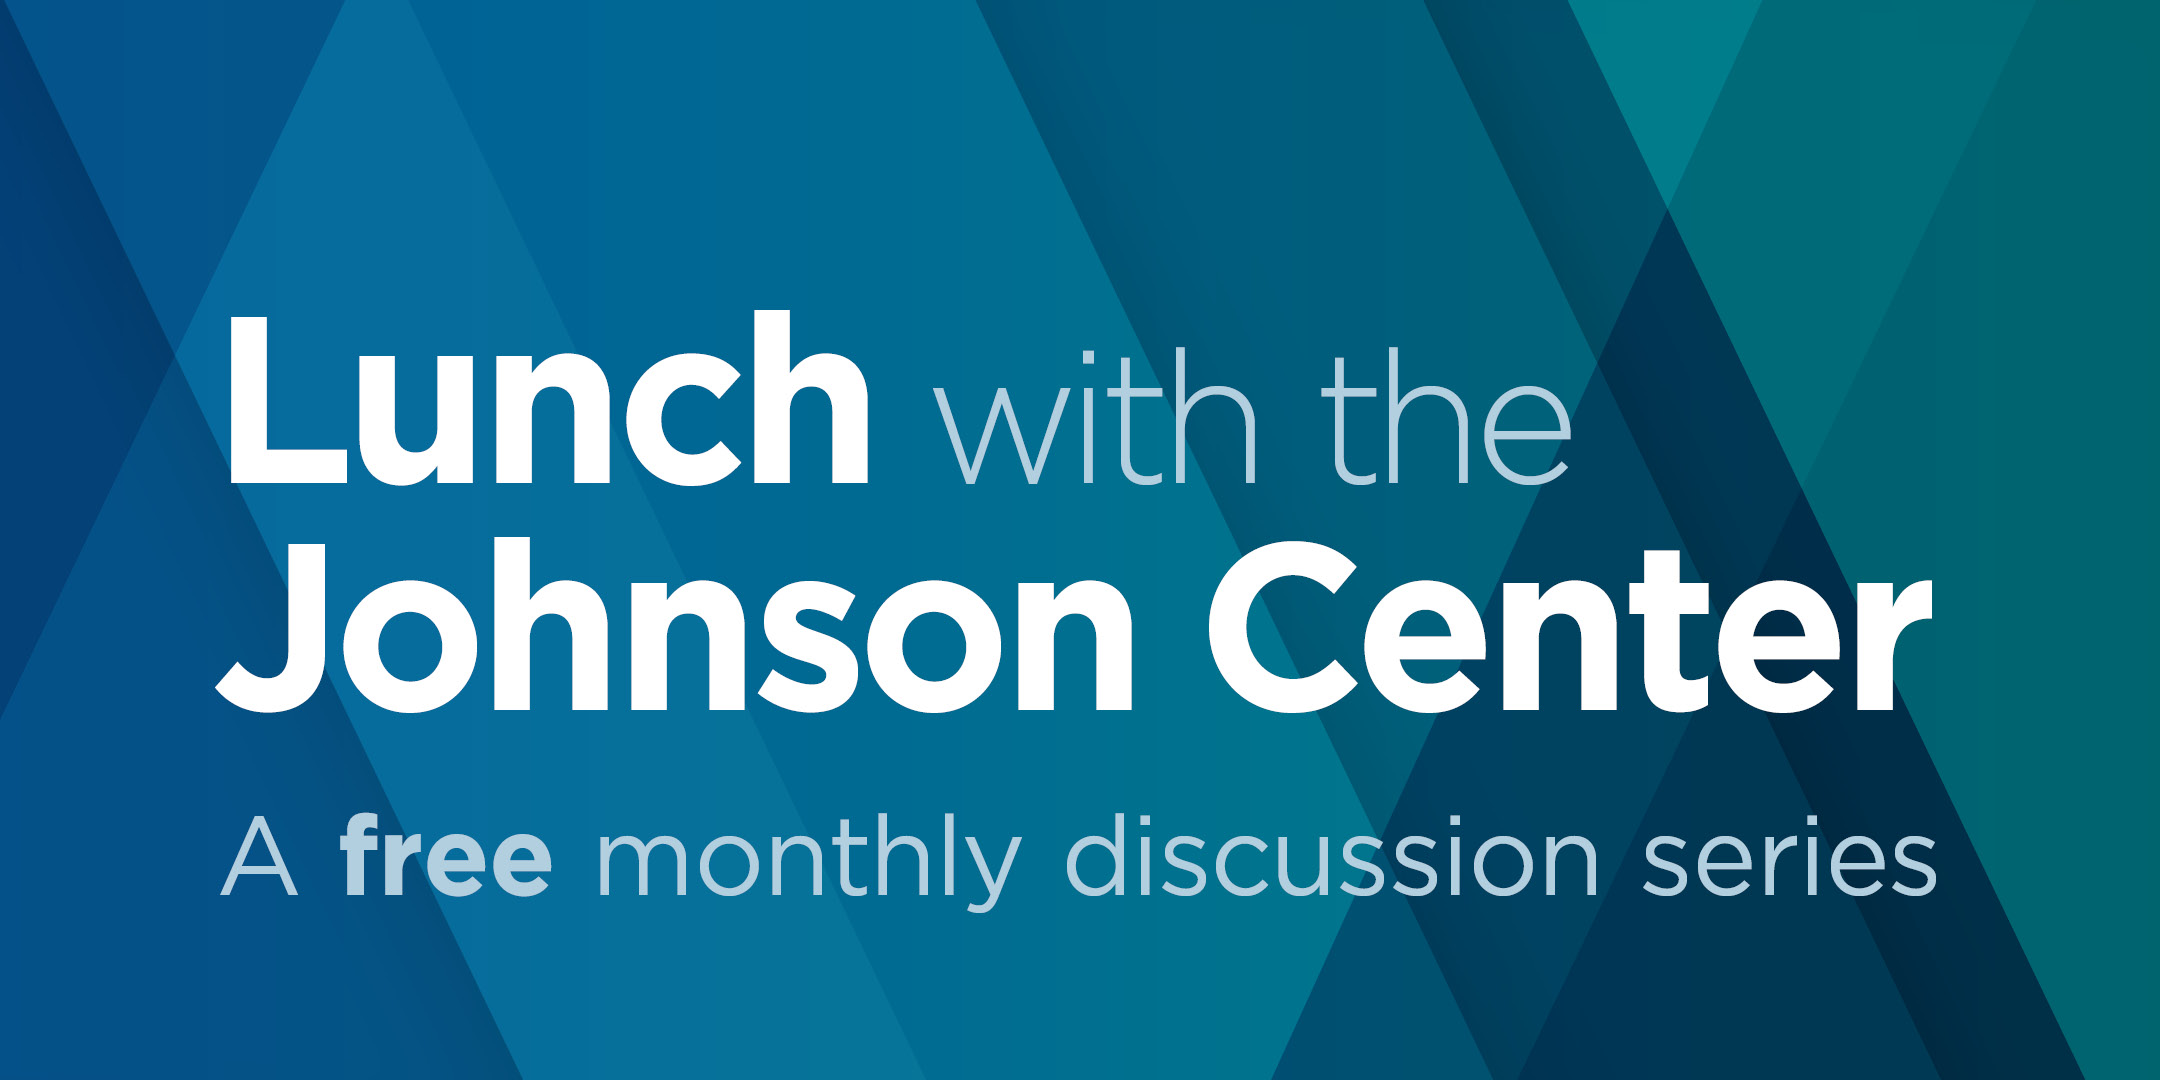 Lunch with the Johnson Center